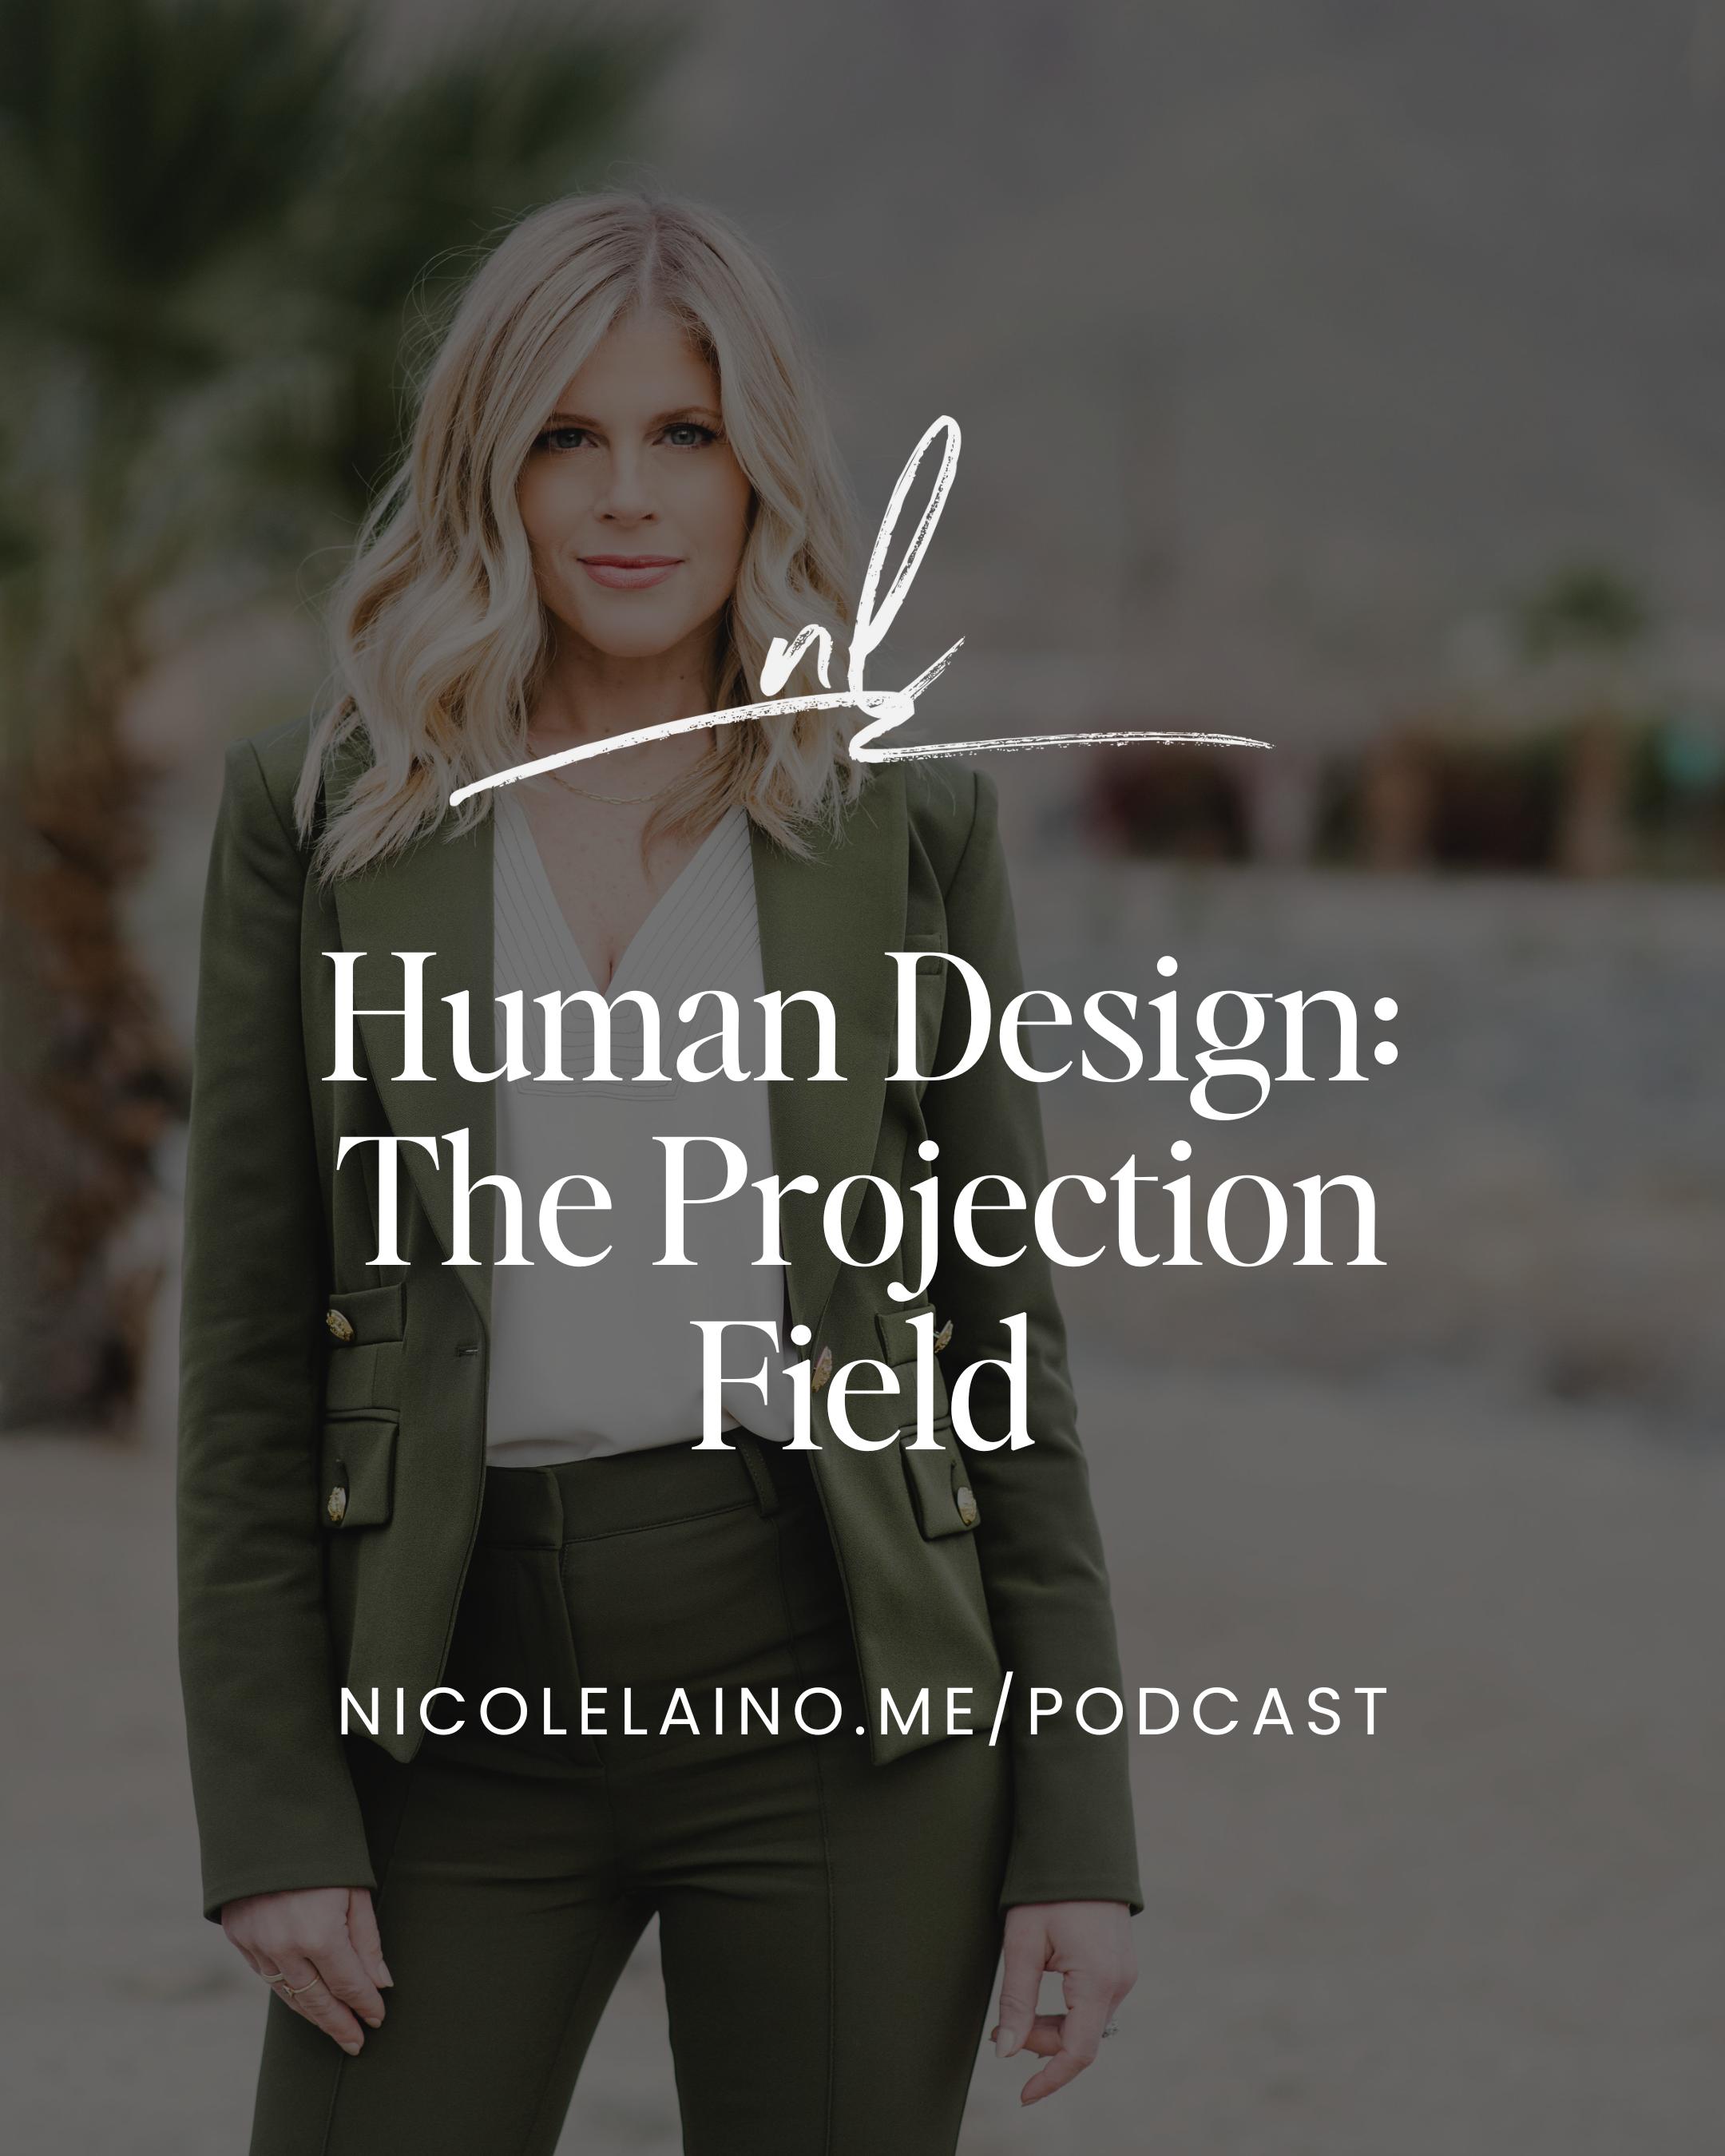 Human Design: The Projection Field